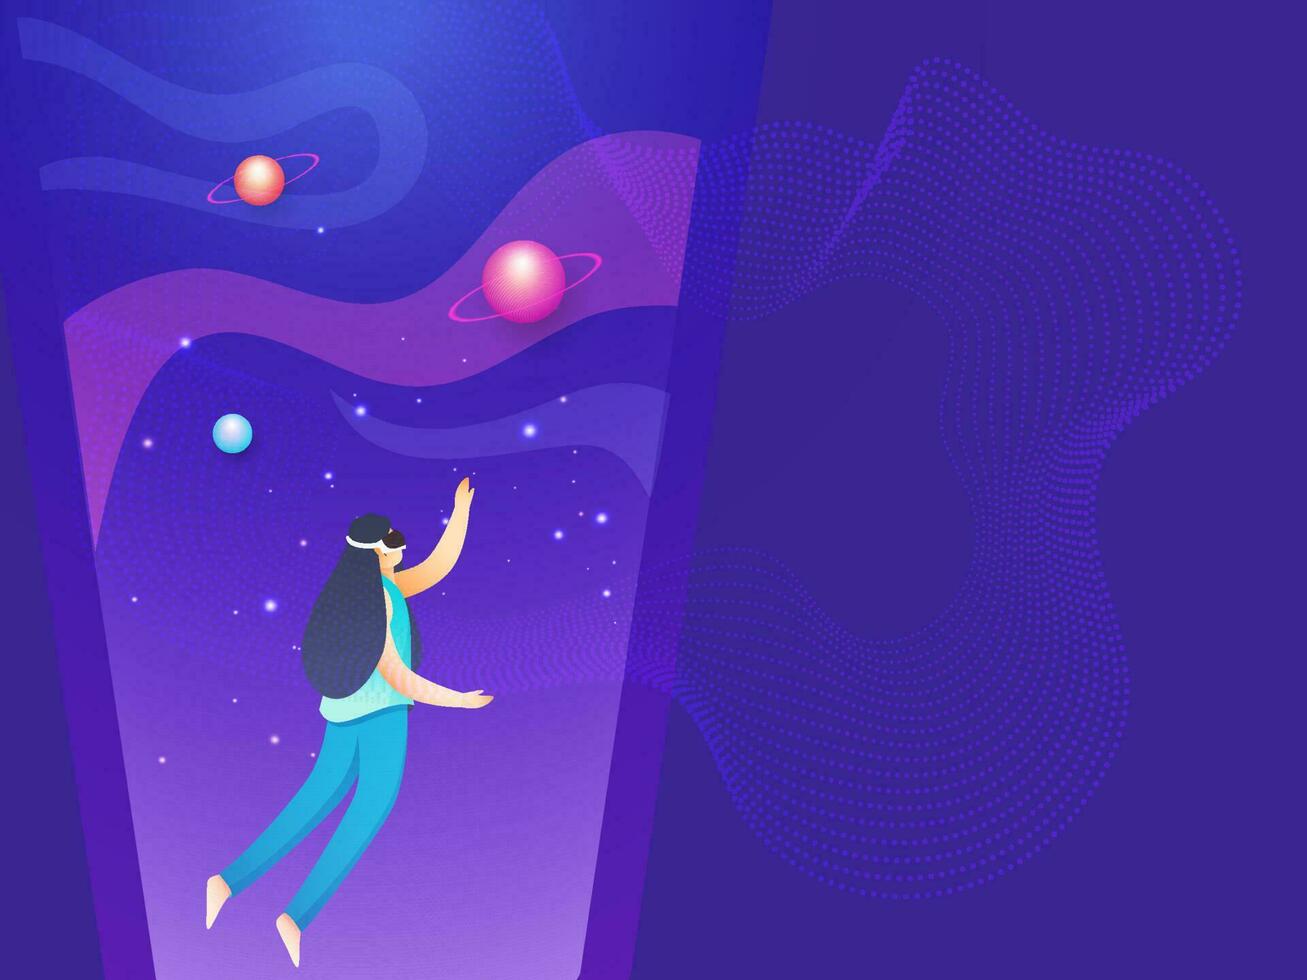 Young Girl Imaginary Universe Through VR Glasses On Violet Abstract Waves Background. vector